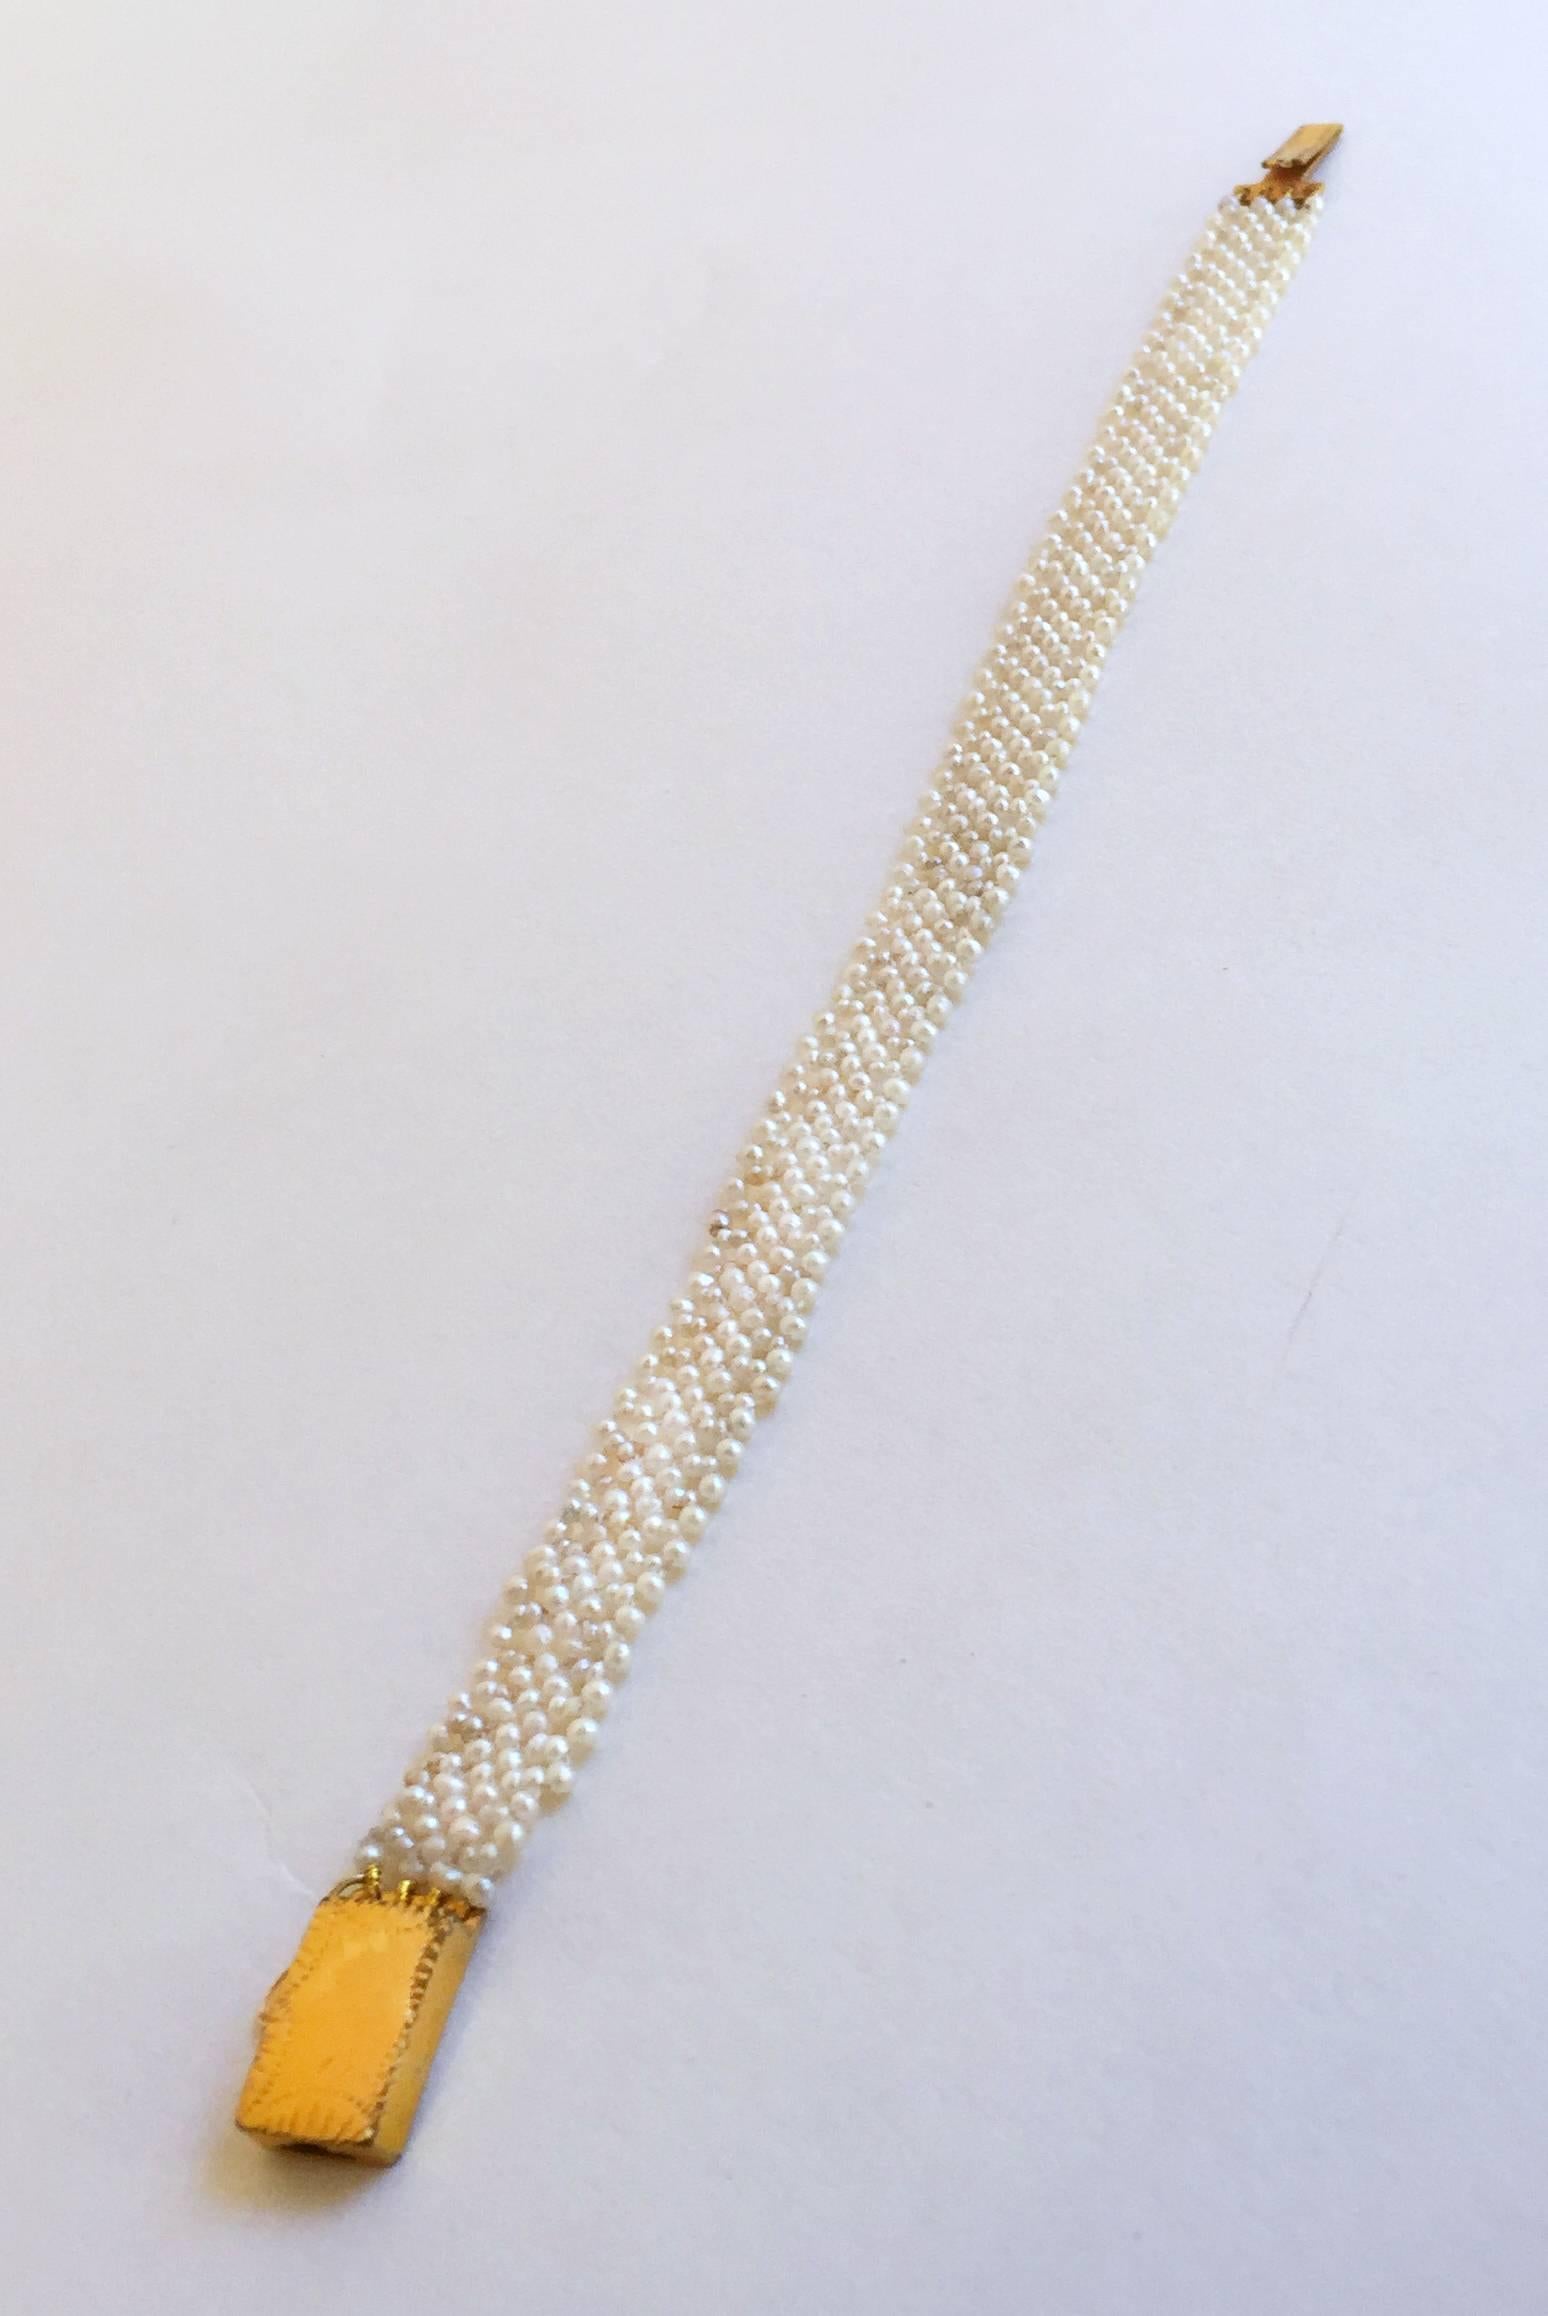 The classic Marina J design woven 1mm pearl bracelet fits delicately on the wrist, yet the weave is doubles stranded for durability. The lace-like design is completed by an English vintage  yellow gold clasp. The bracelet is 6.75 inches long. This